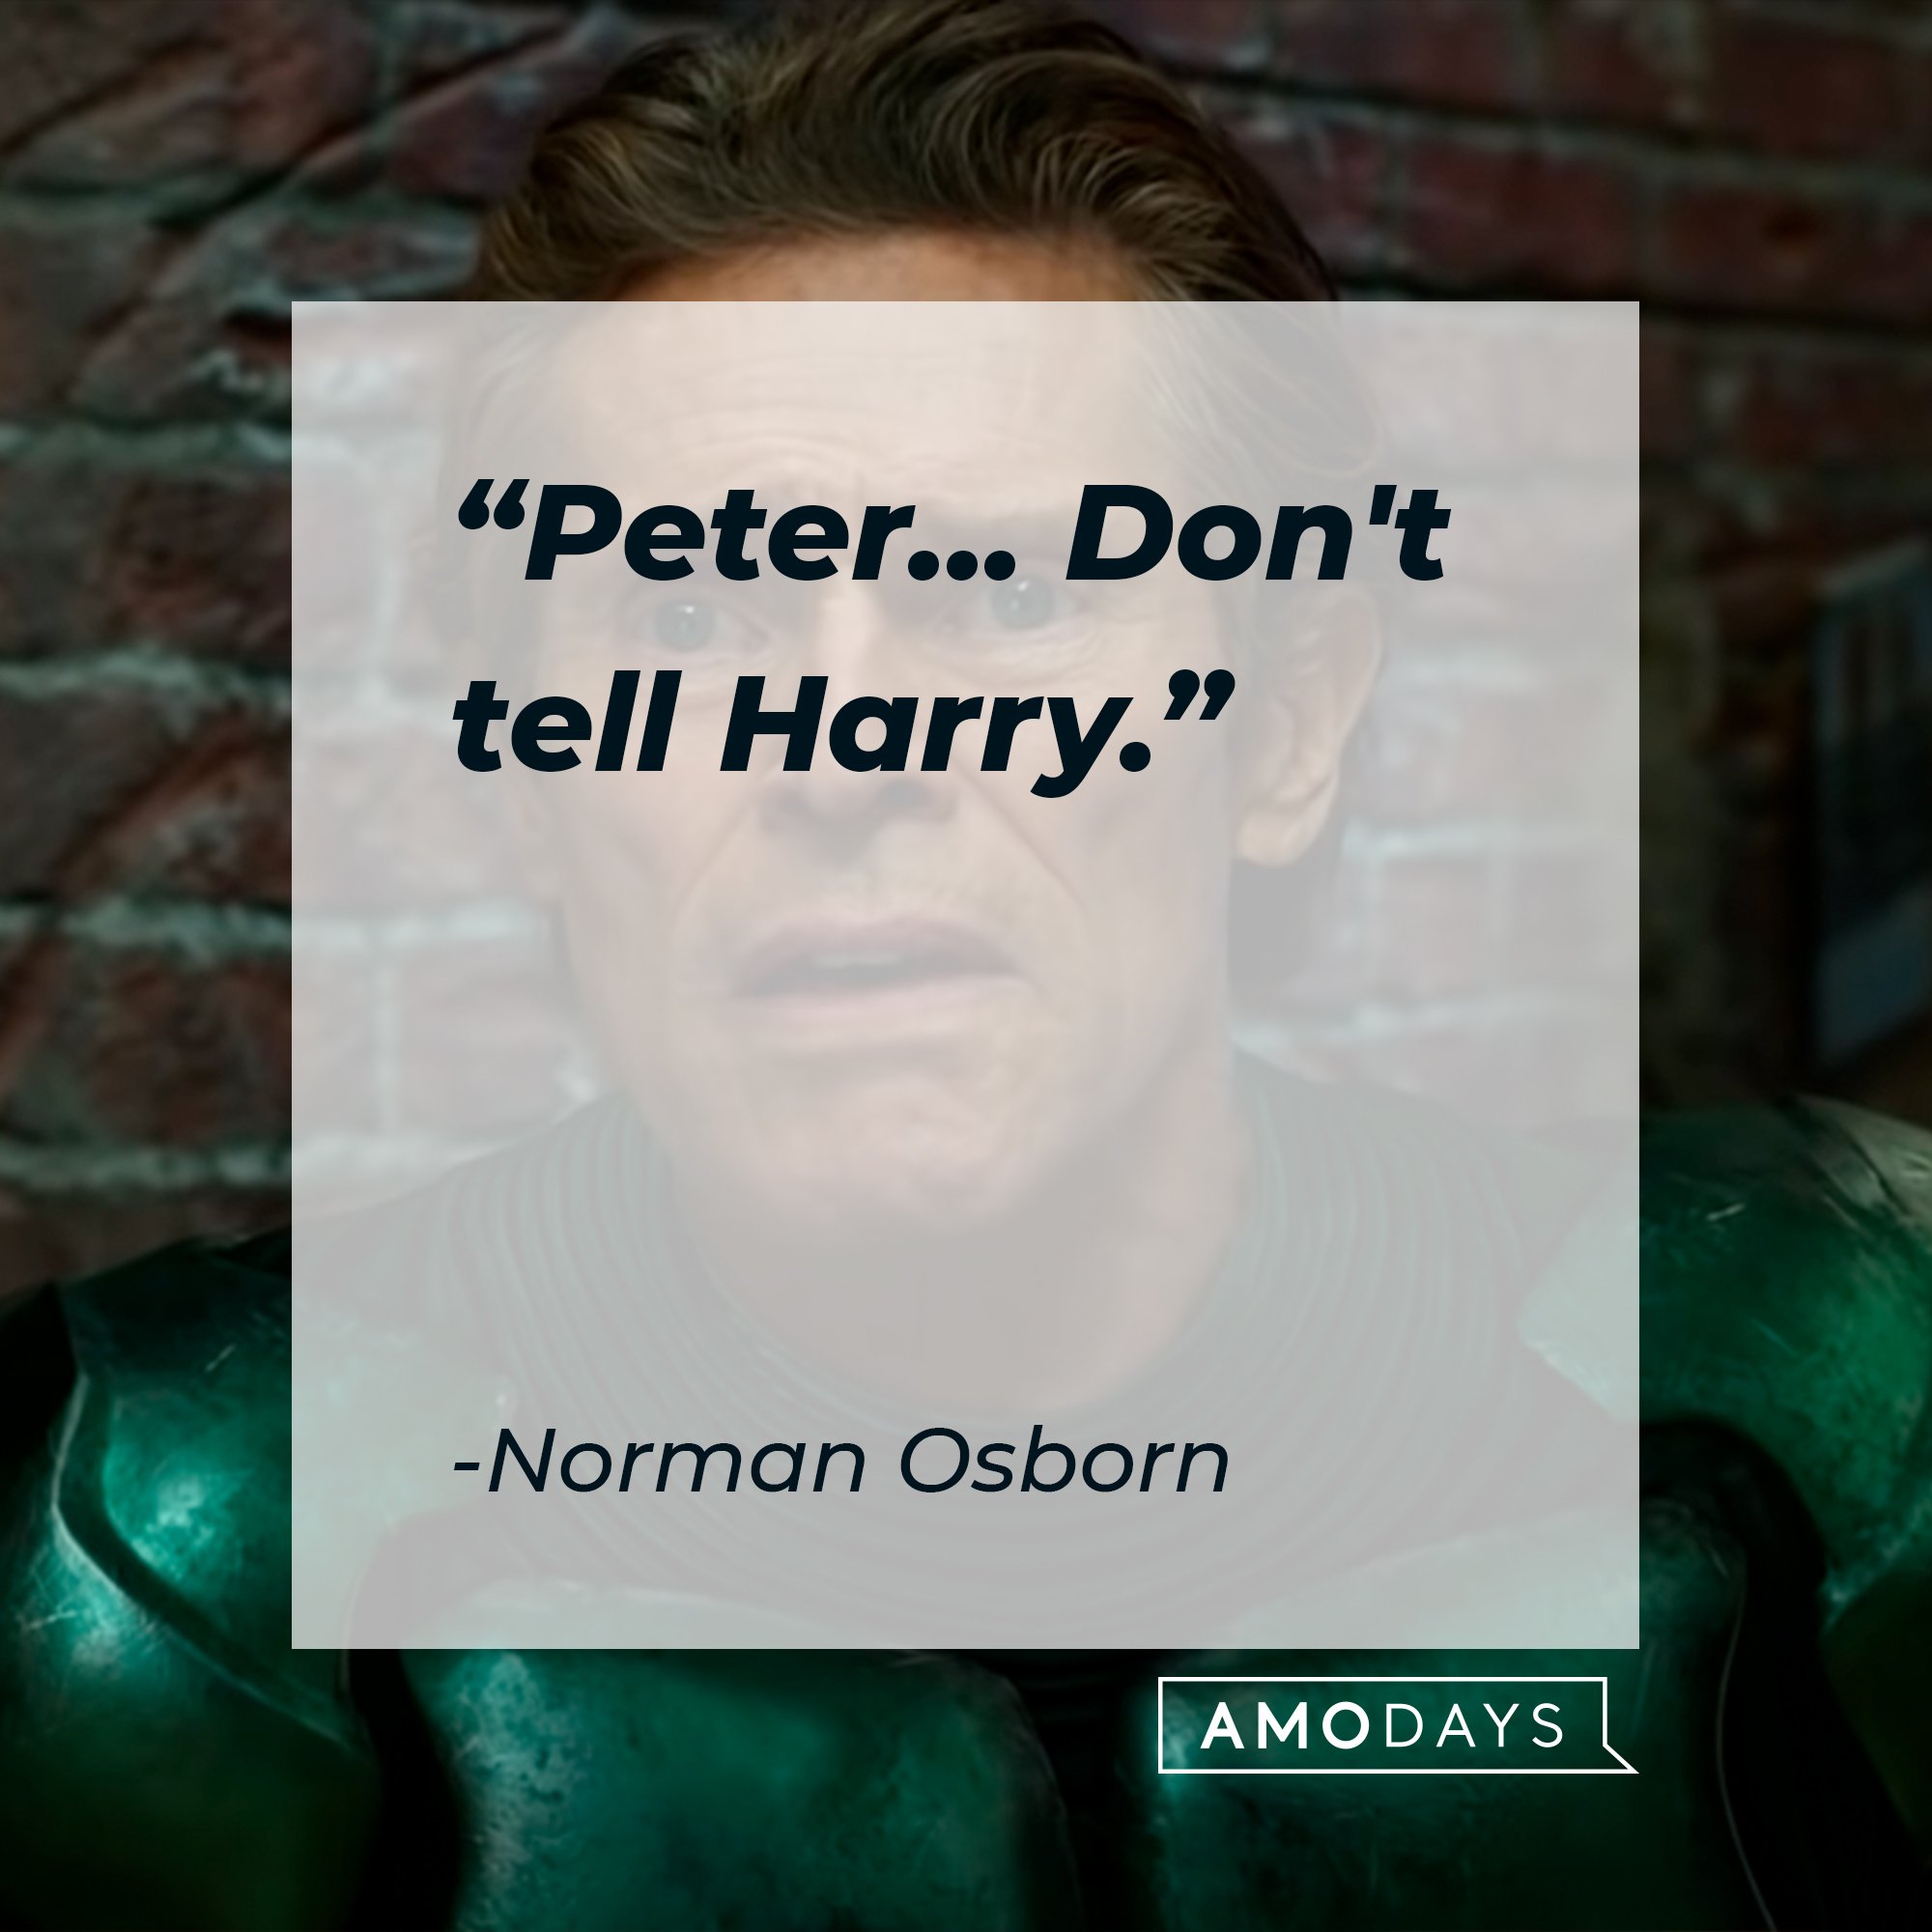 Norman Osborn’s quote: "Peter... Don't tell Harry." | Image: AmoDays